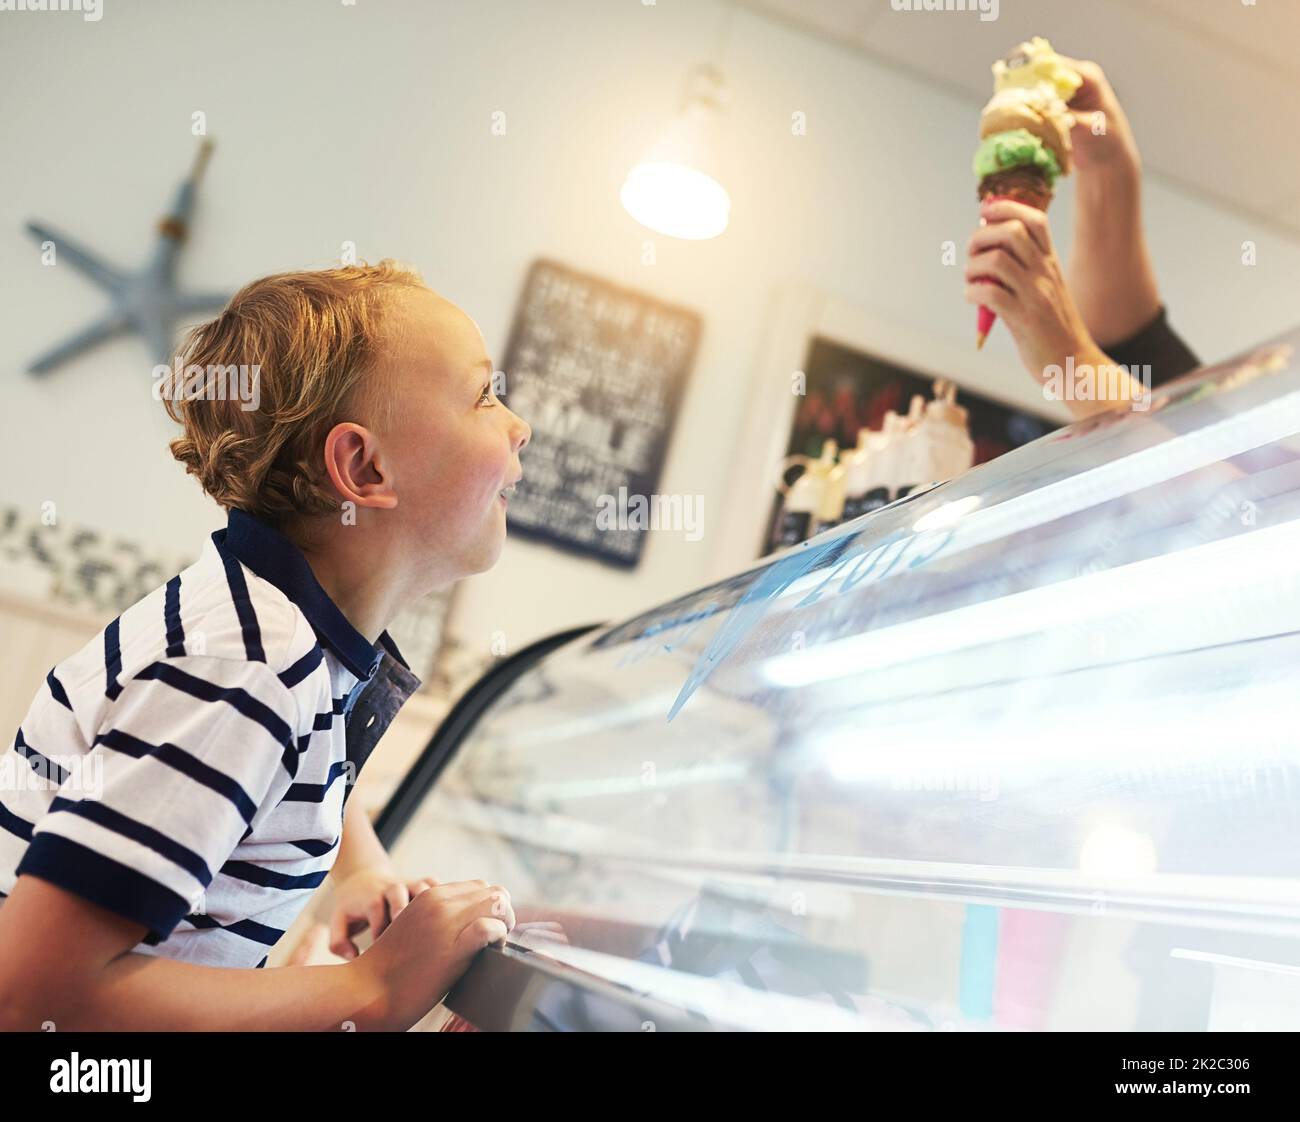 Five scoops please. Cropped shot of a young boy eagerly waiting for an ice cream cone. Stock Photo